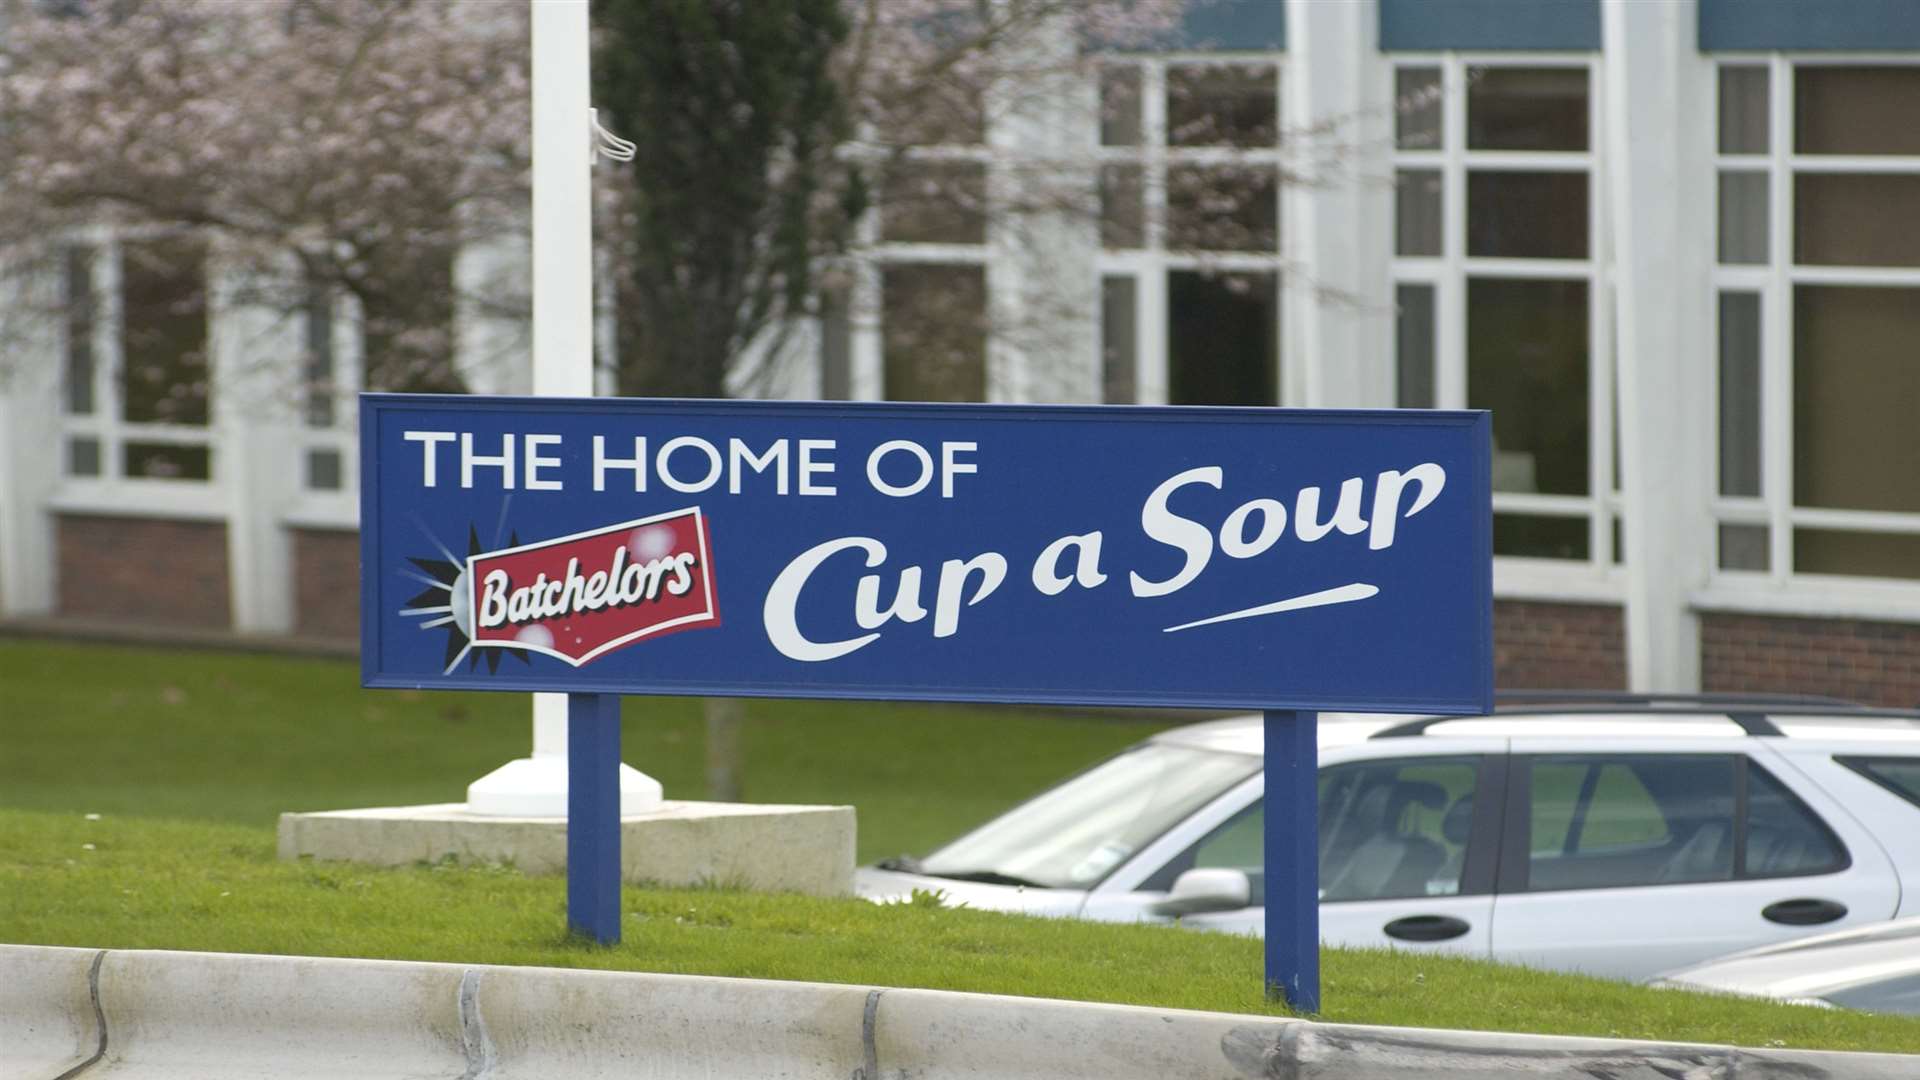 The Batchelors Cup A Soup factory in Ashford